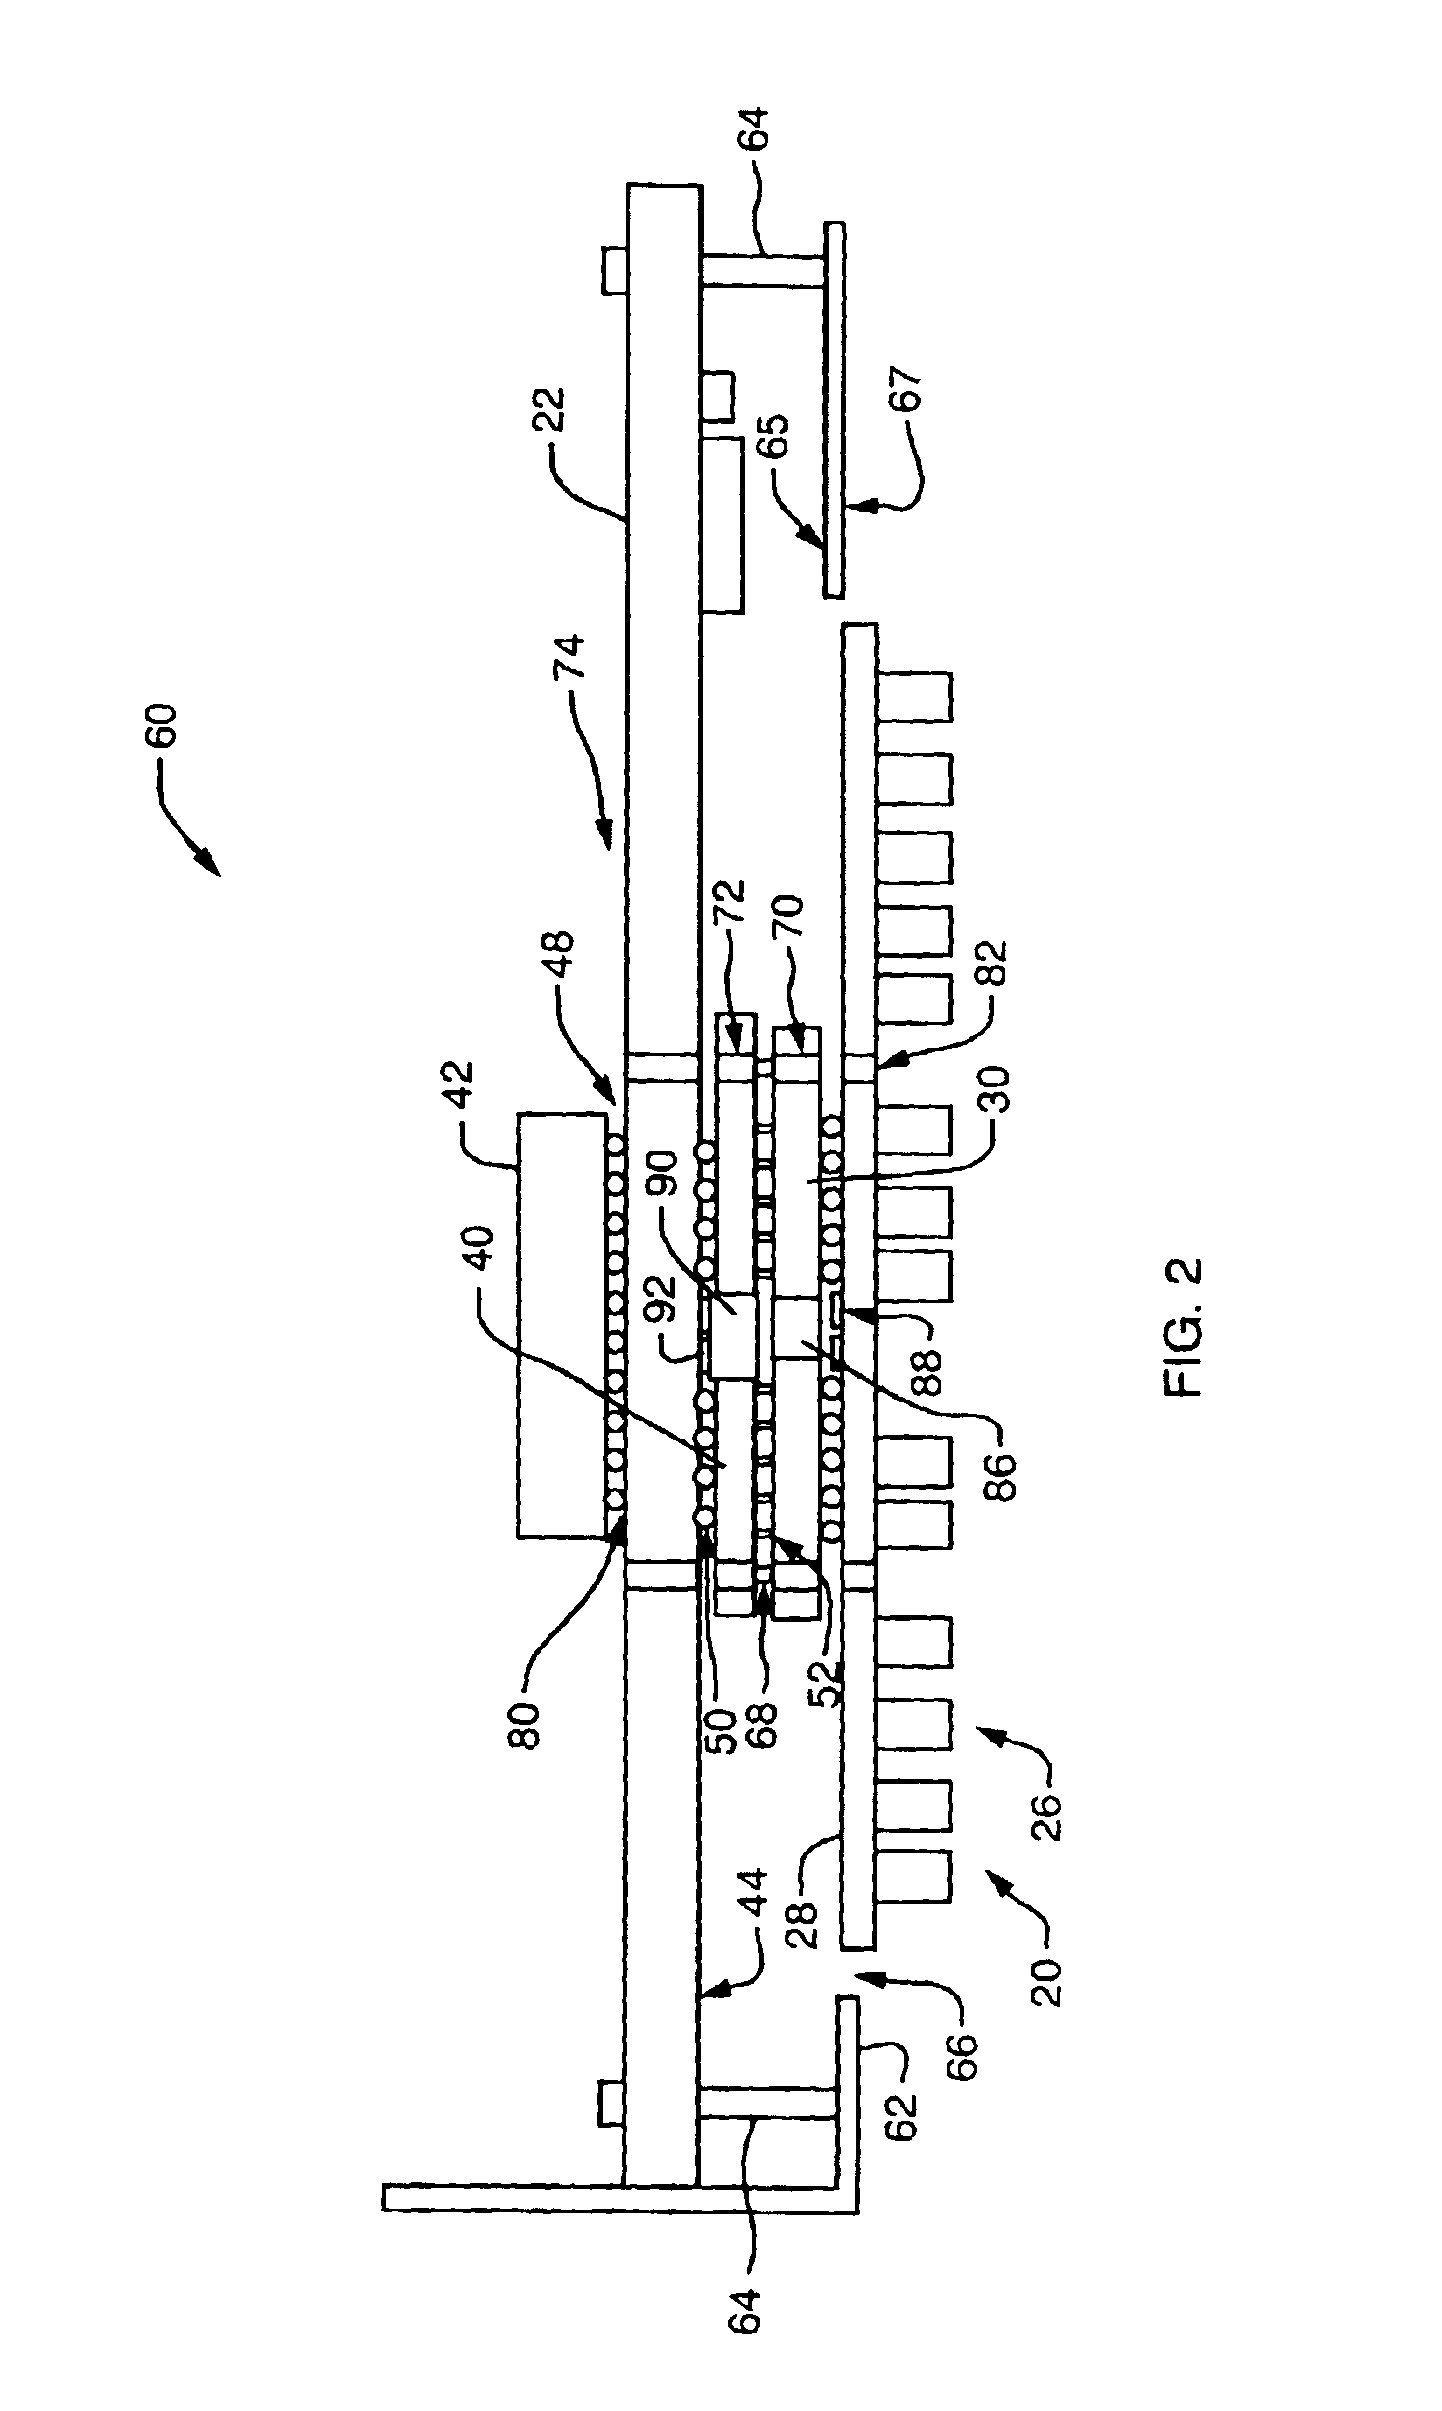 Methods and apparatus for testing a circuit board using a surface mountable adaptor